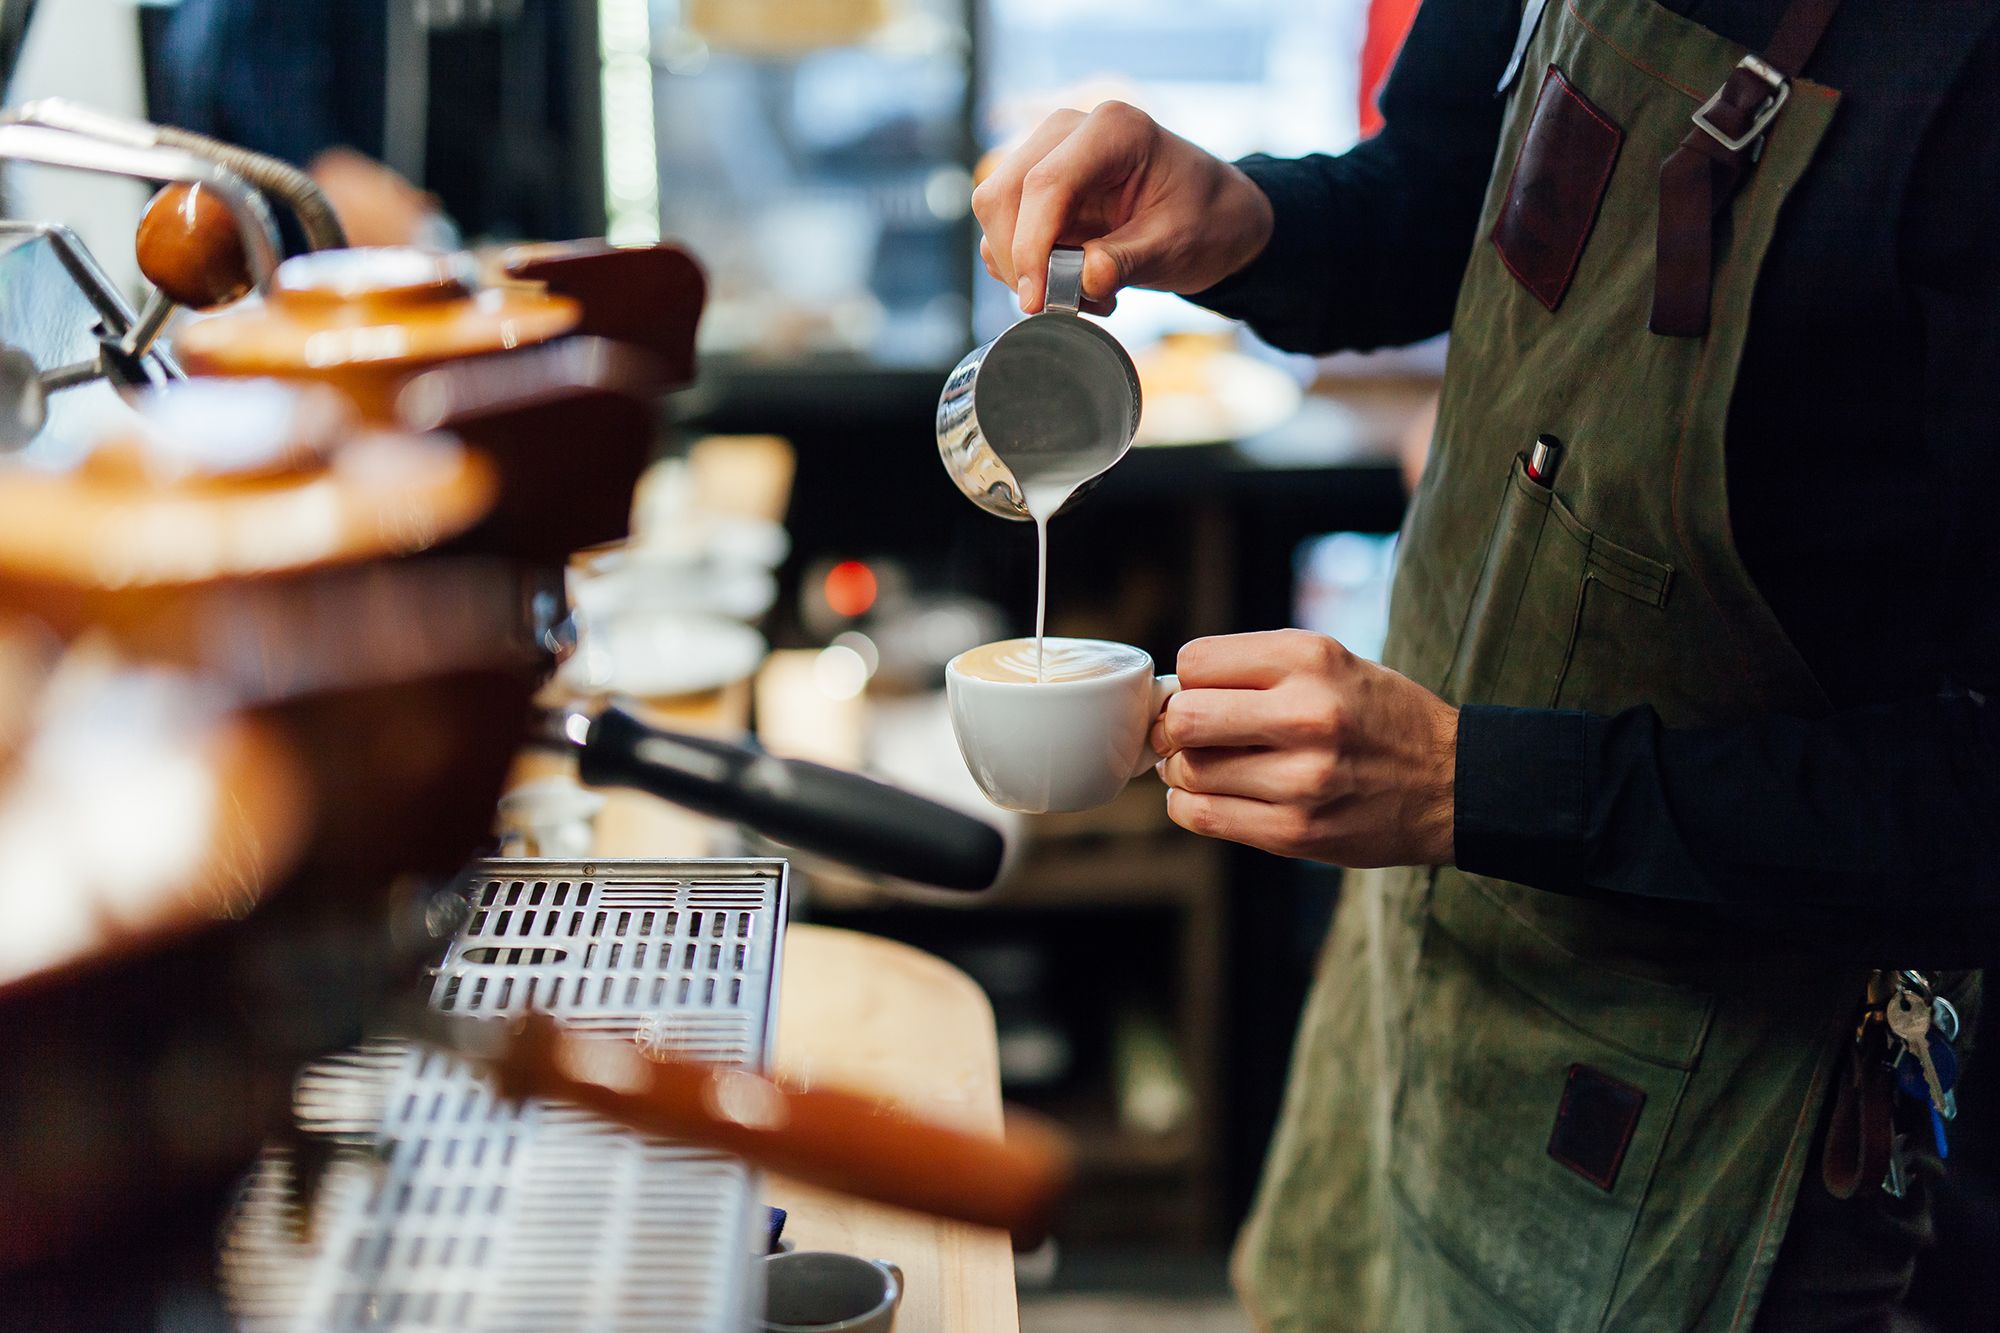 Discover the Best Coffee Shop Etiquette from Baristas